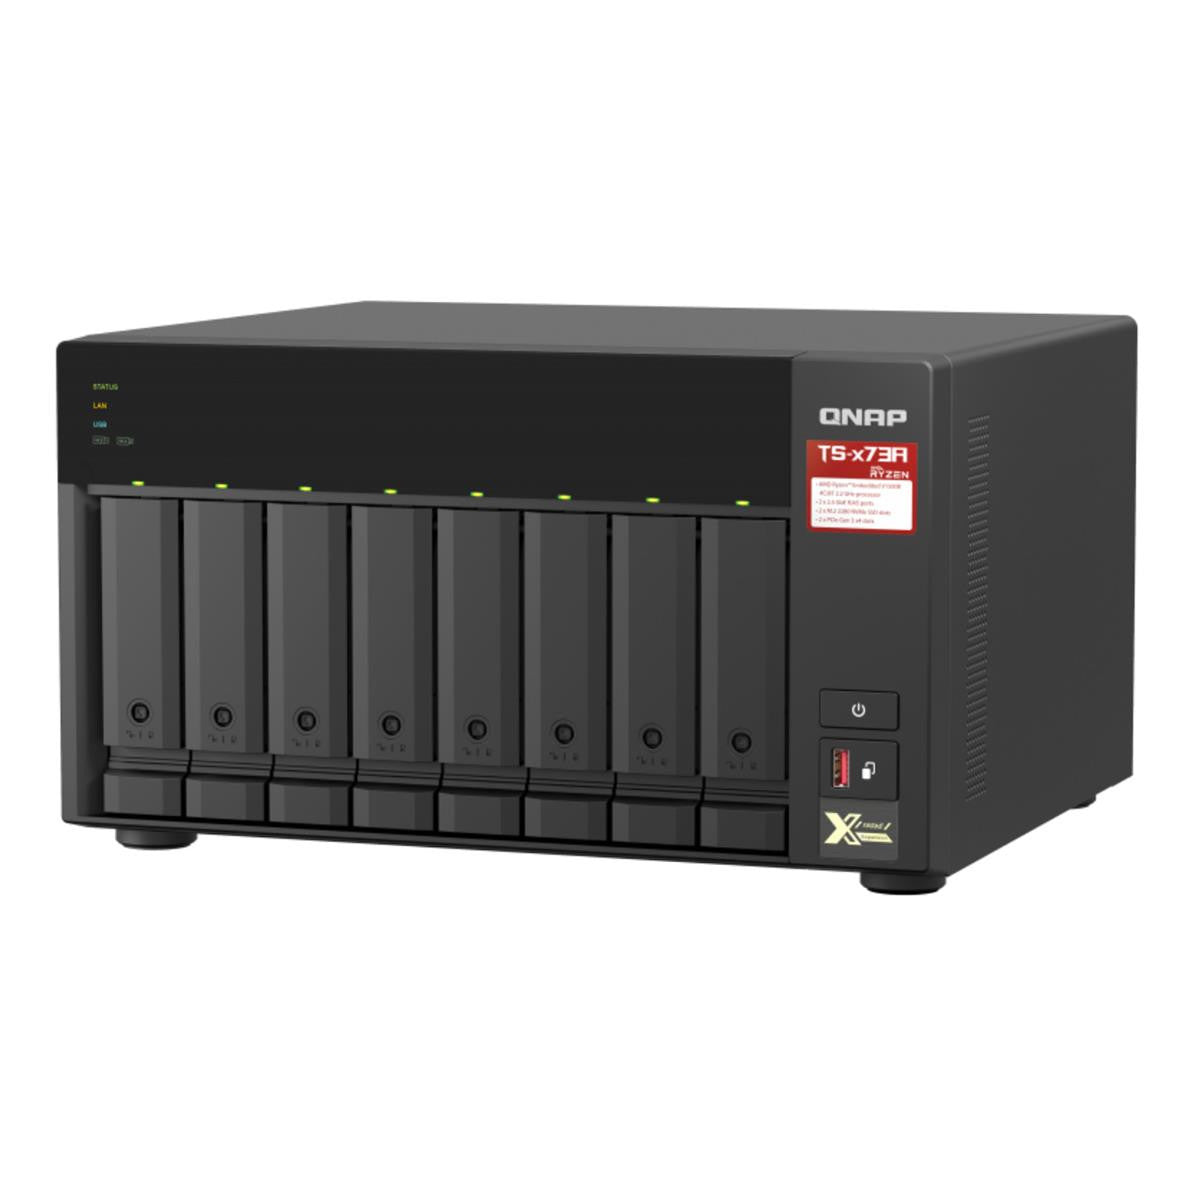 QNAP TS-873A 8-BAY NAS with 32GB DDR4 RAM and 16TB (8x2TB) Seagate Ironwolf NAS Drives Fully Assembled and Tested